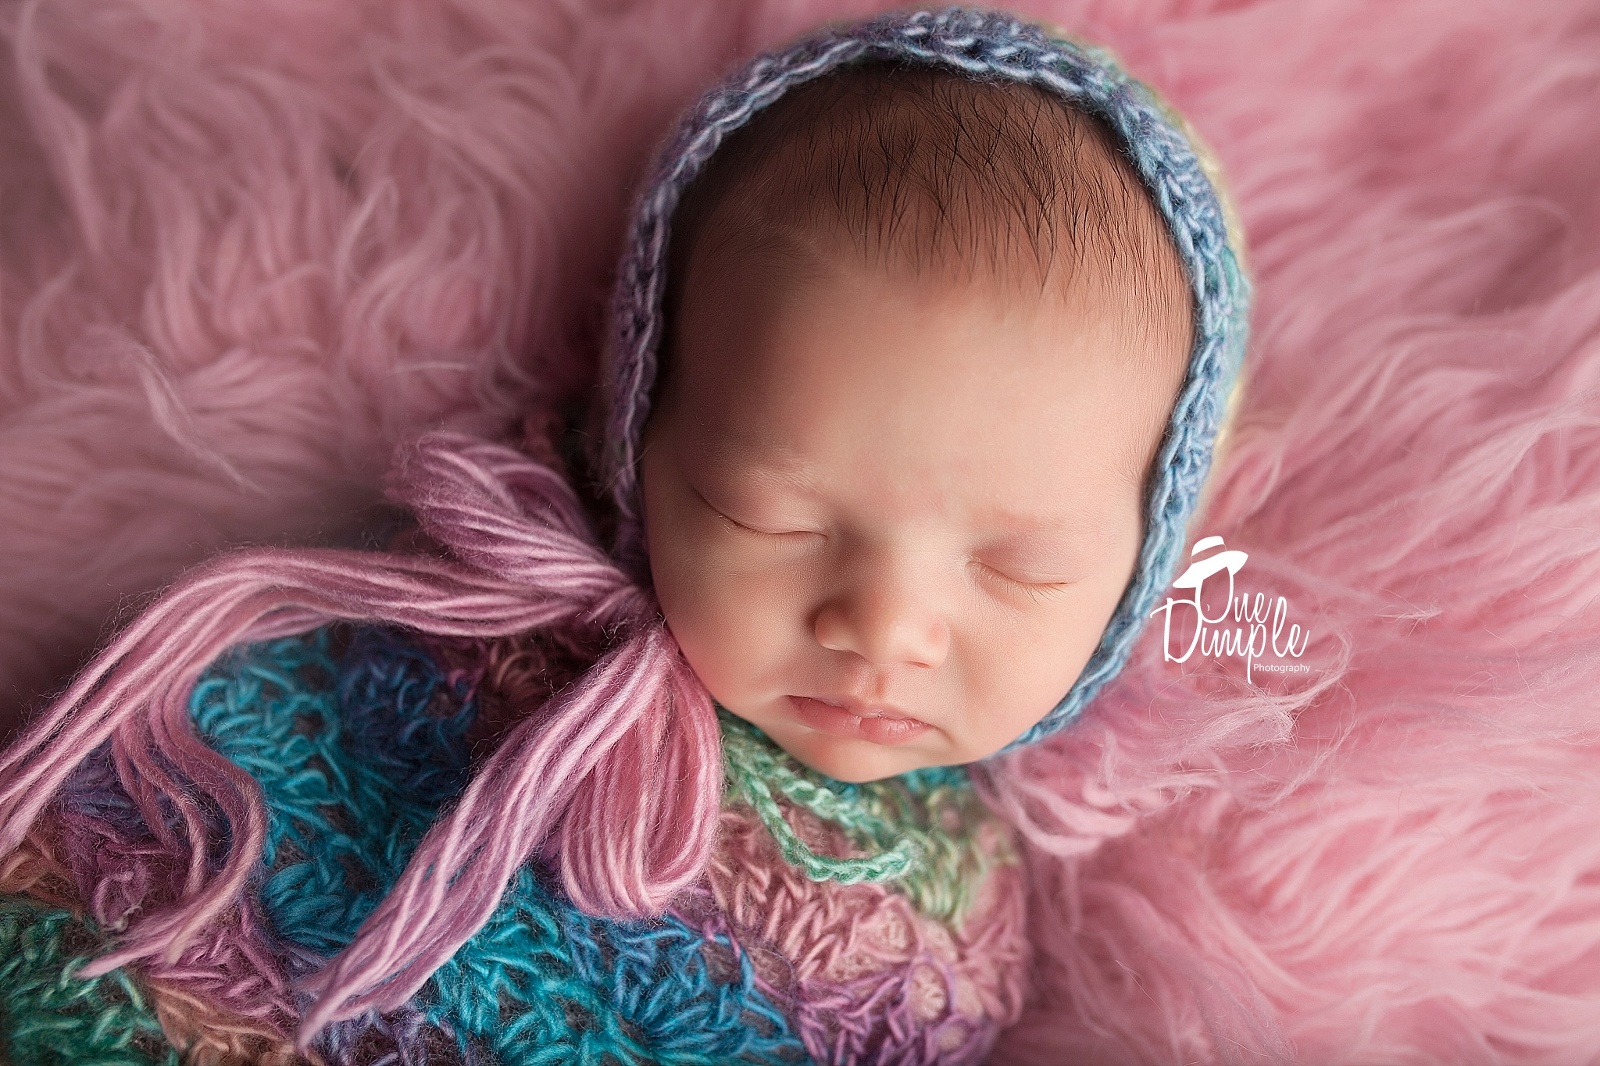 Newborn wrapped in colorful sack